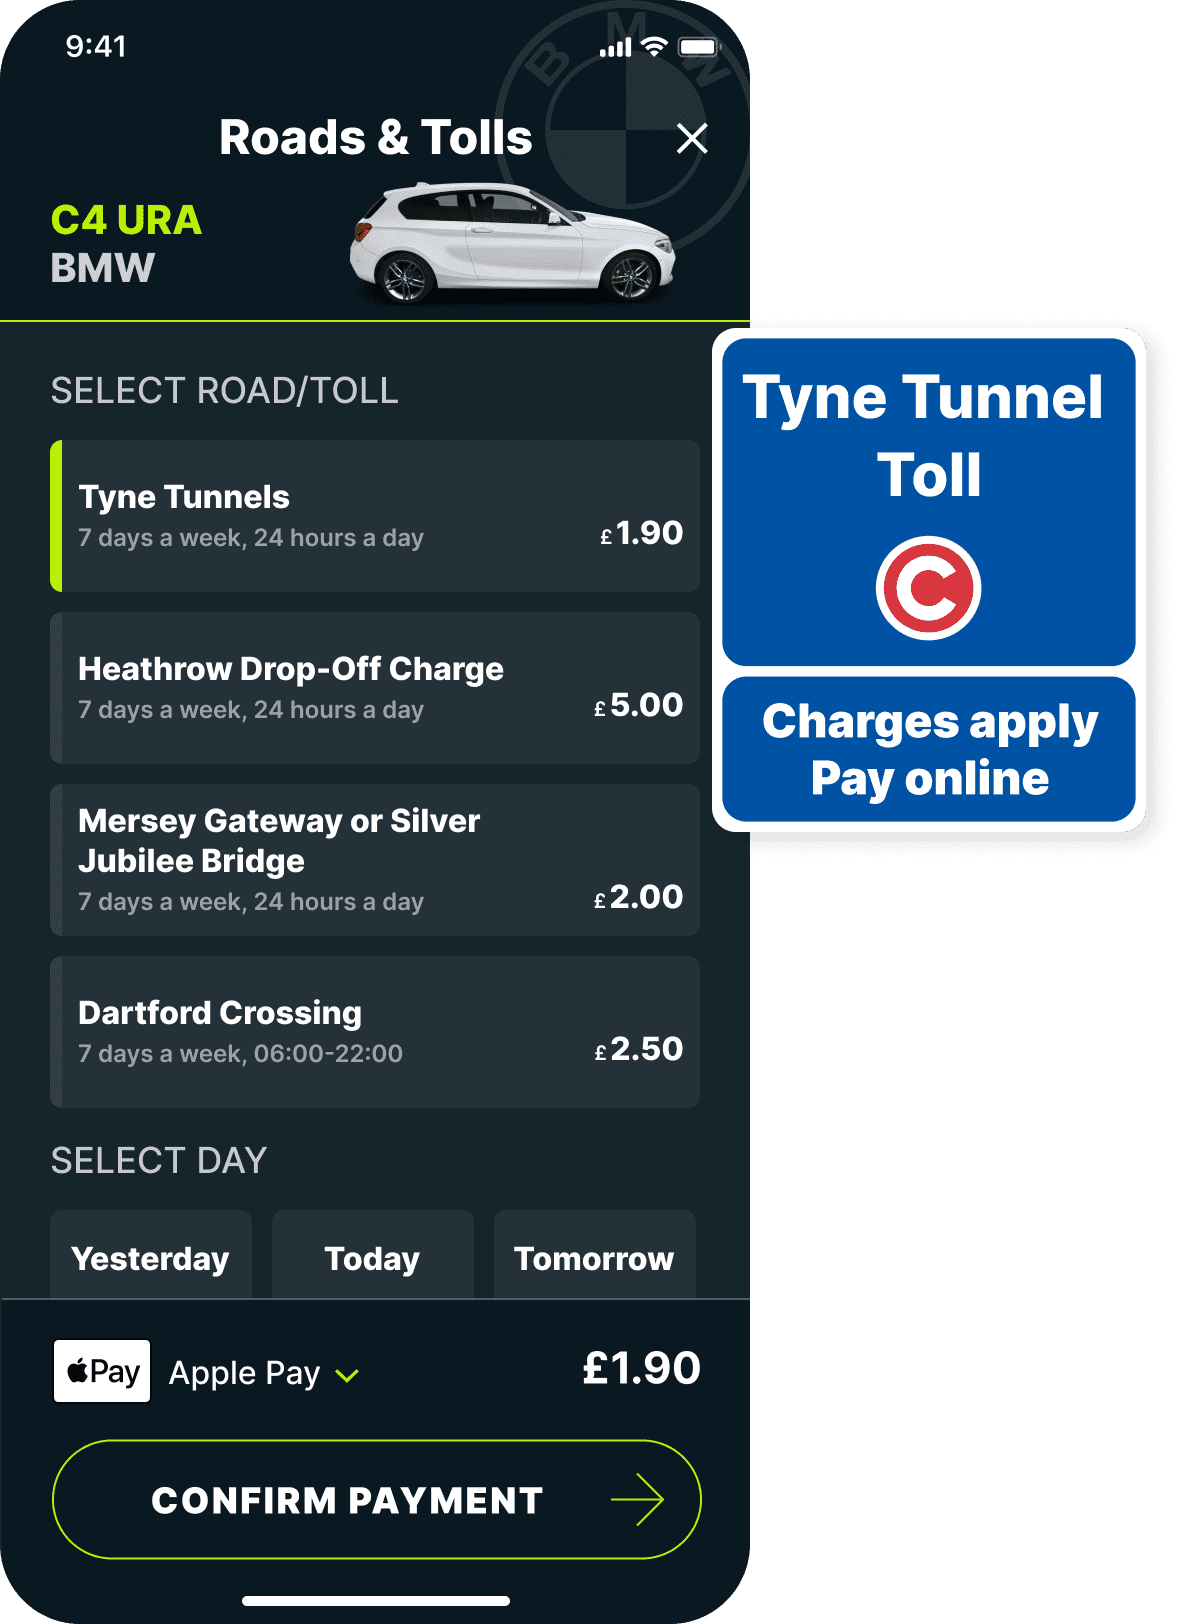 Caura payment screen for Tyne Tunnels with road sign